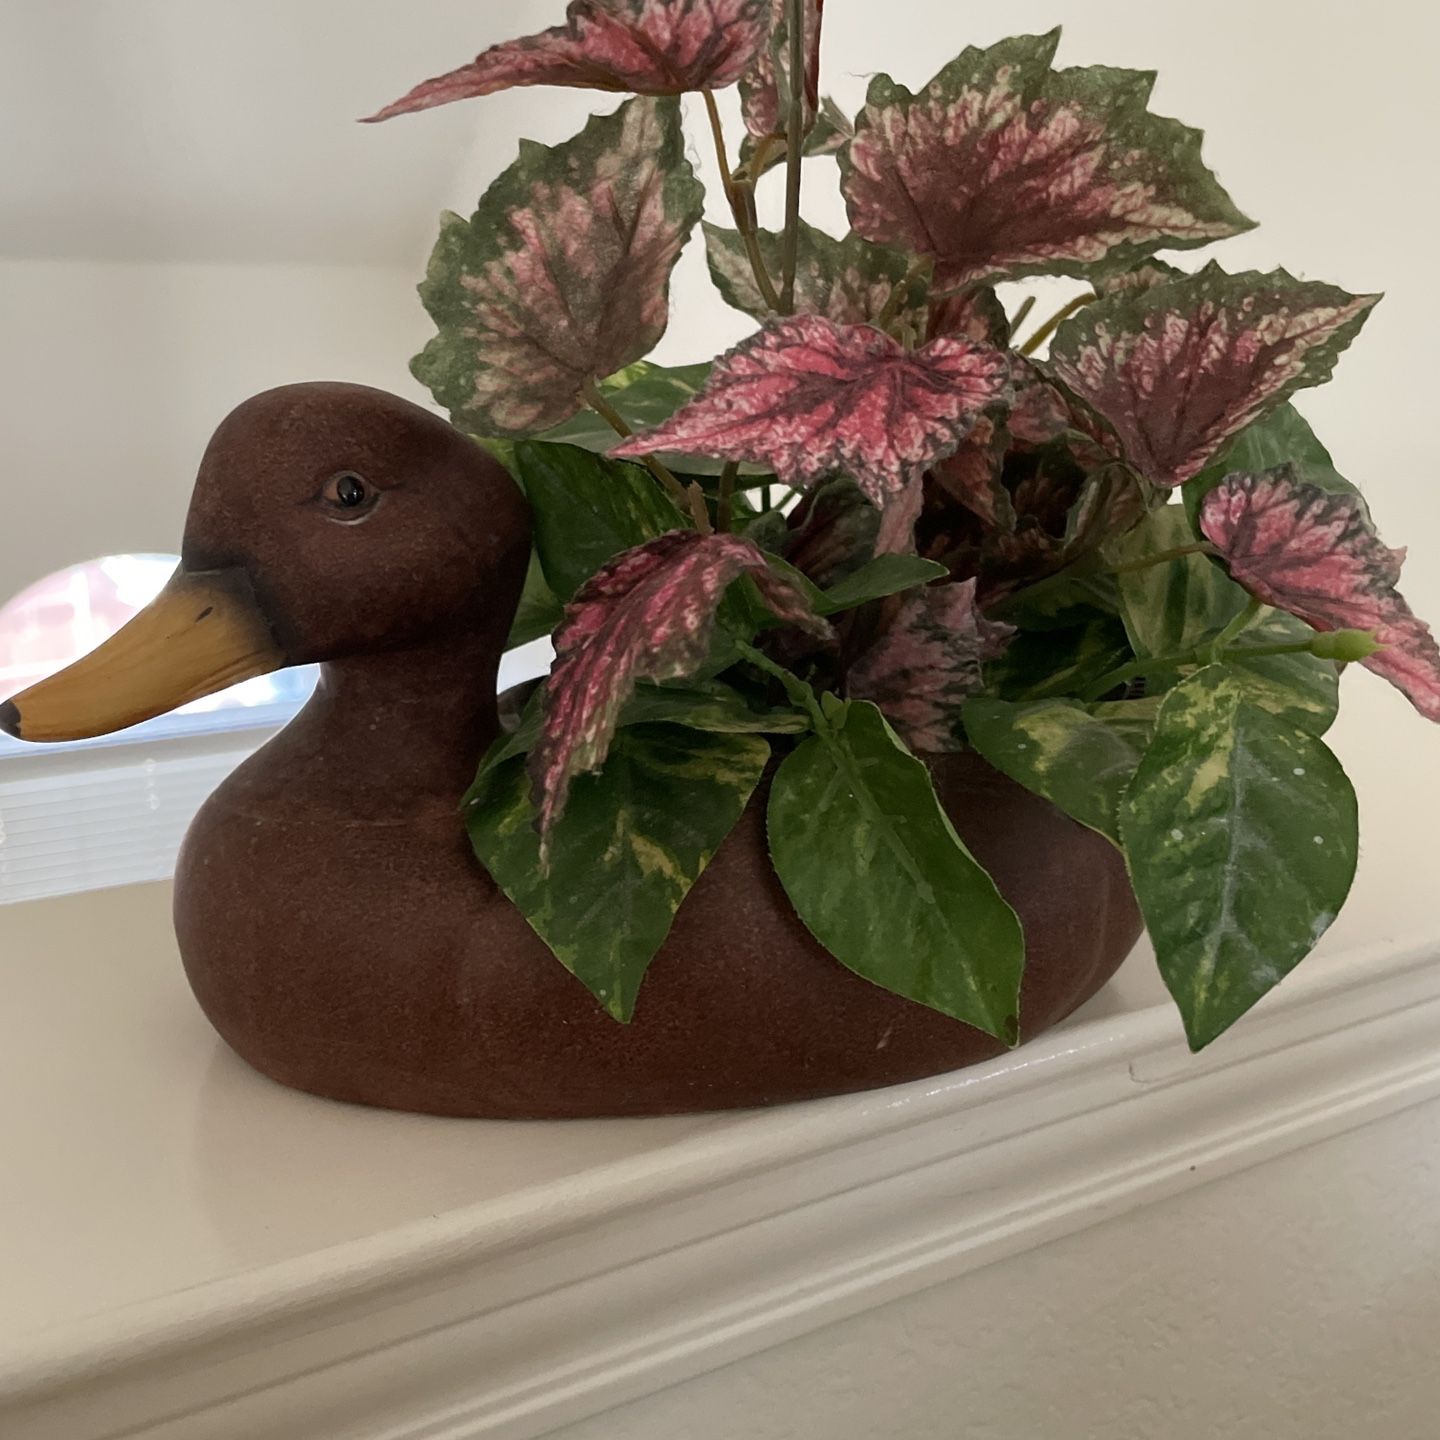 A Ceramic Brown Duck Decor With Fake  Plants 10 Inches Long